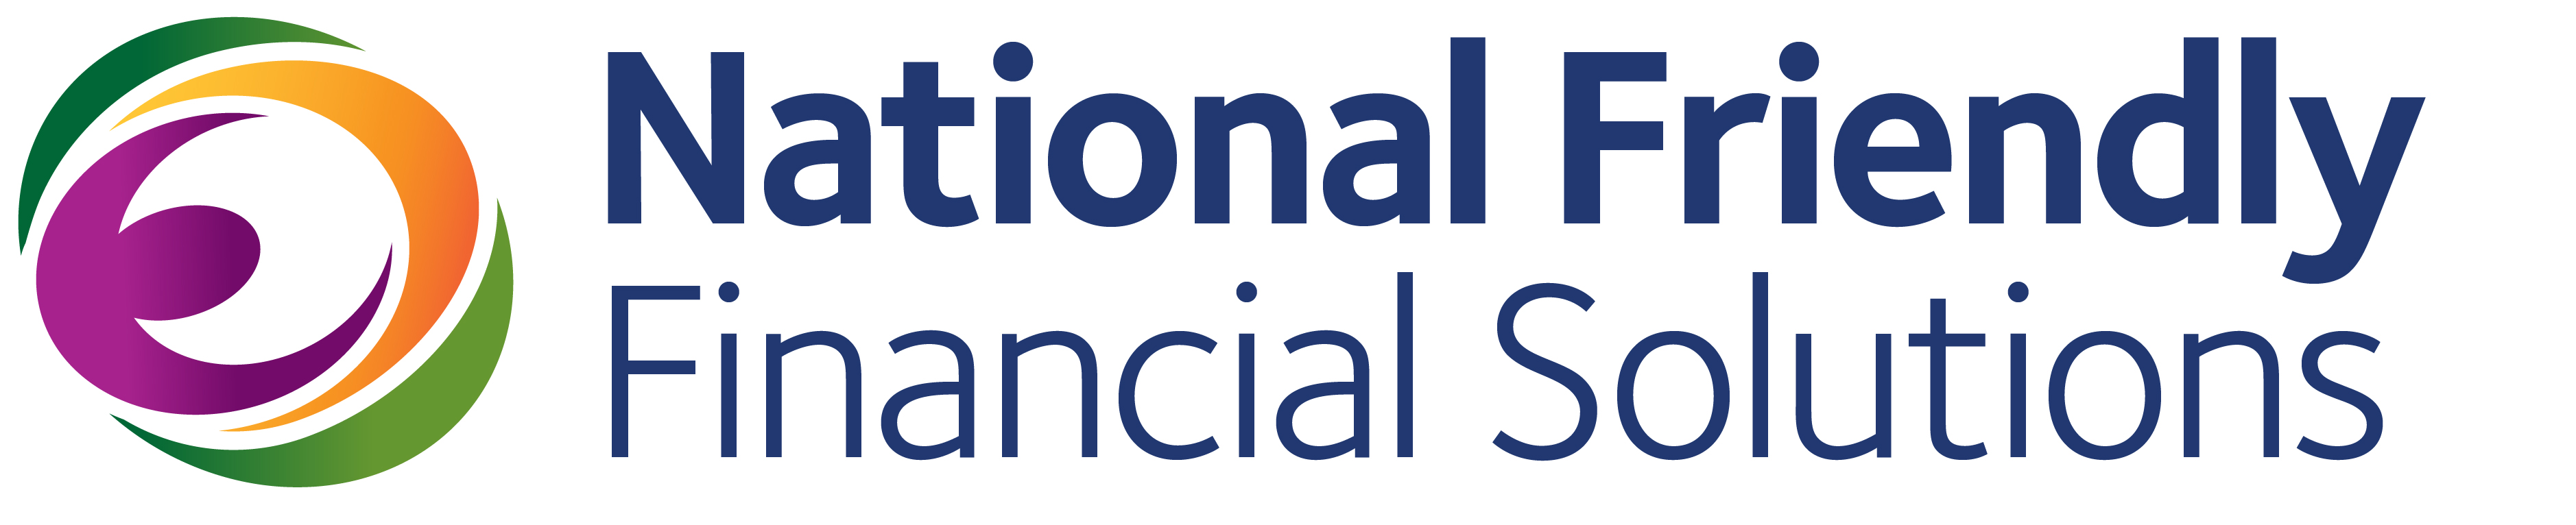 National Friendly Financial Solutions